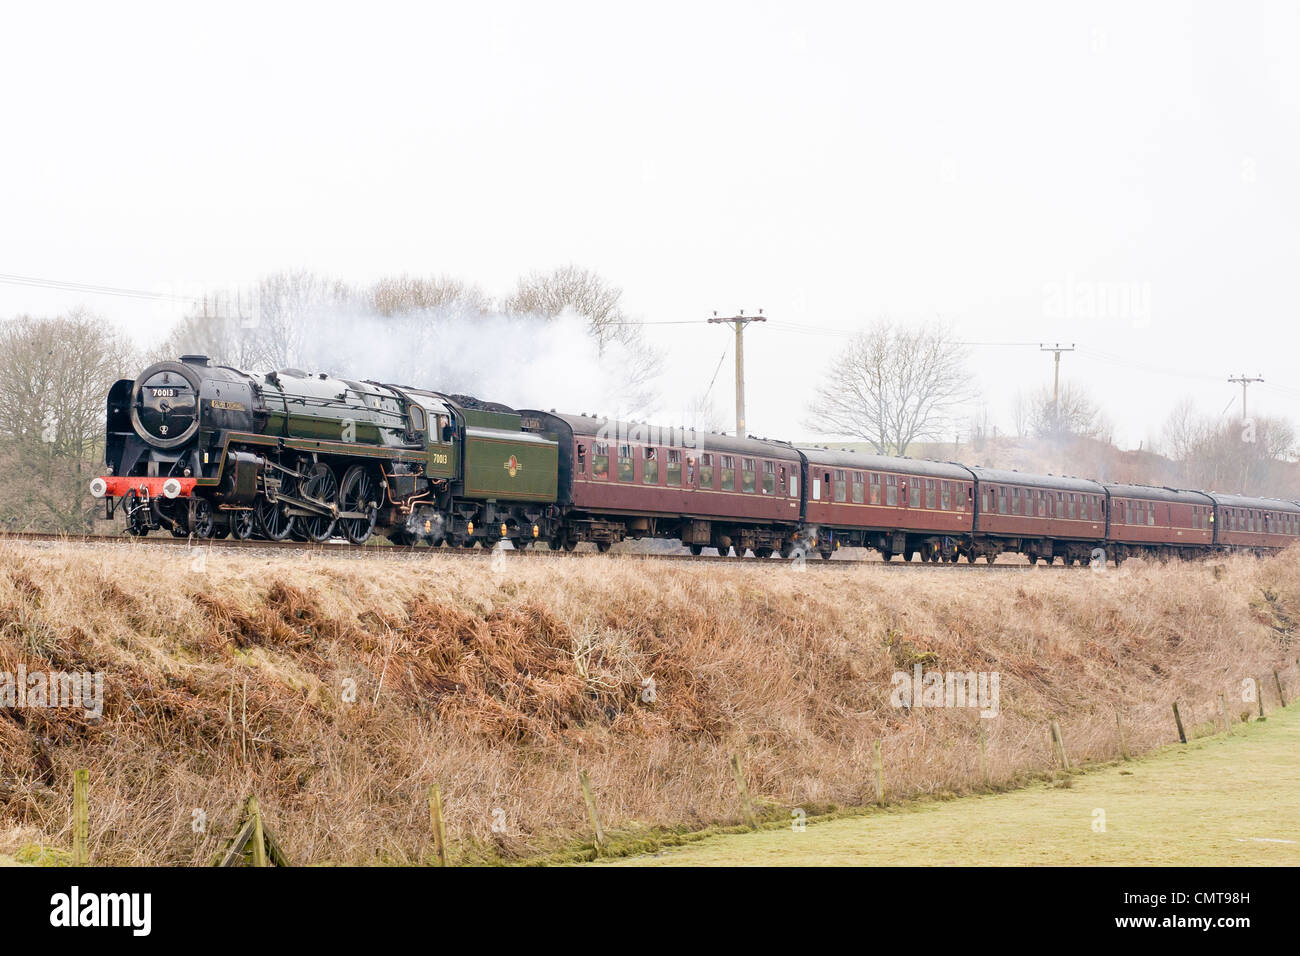 Steam locomotive pulling a passenger train on the East Lancs Railway at Burrs Country park Stock Photo